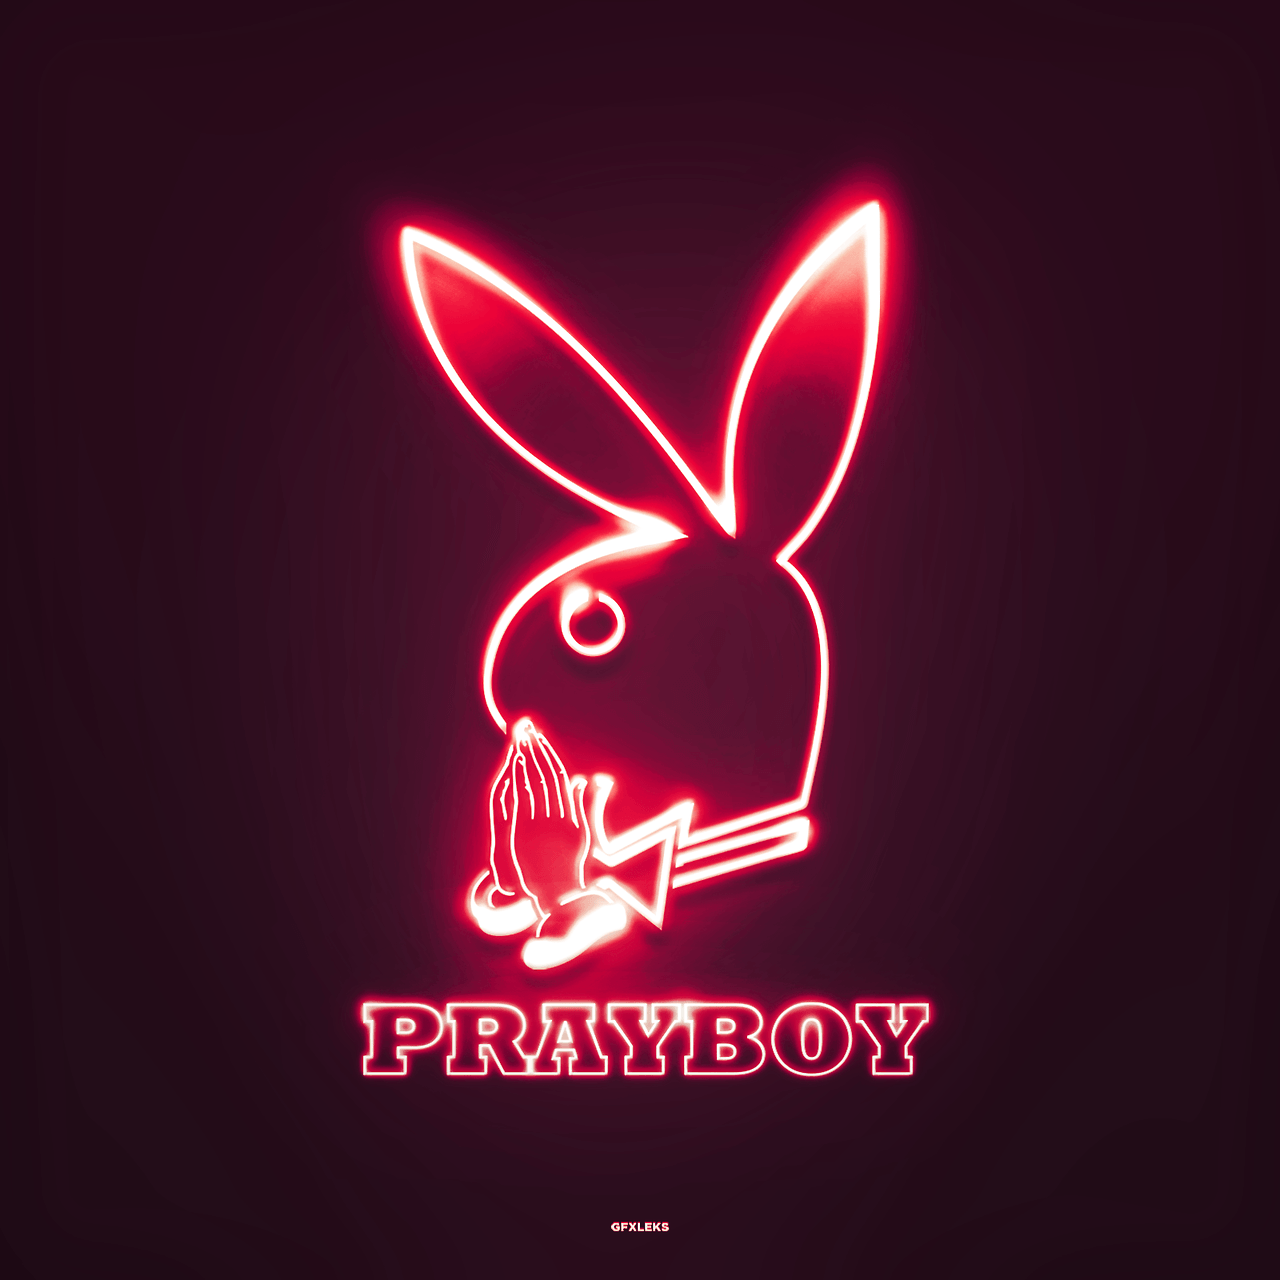 Playboy Bunny Logo Neon Lights Playboy is one of the most recognizable ...